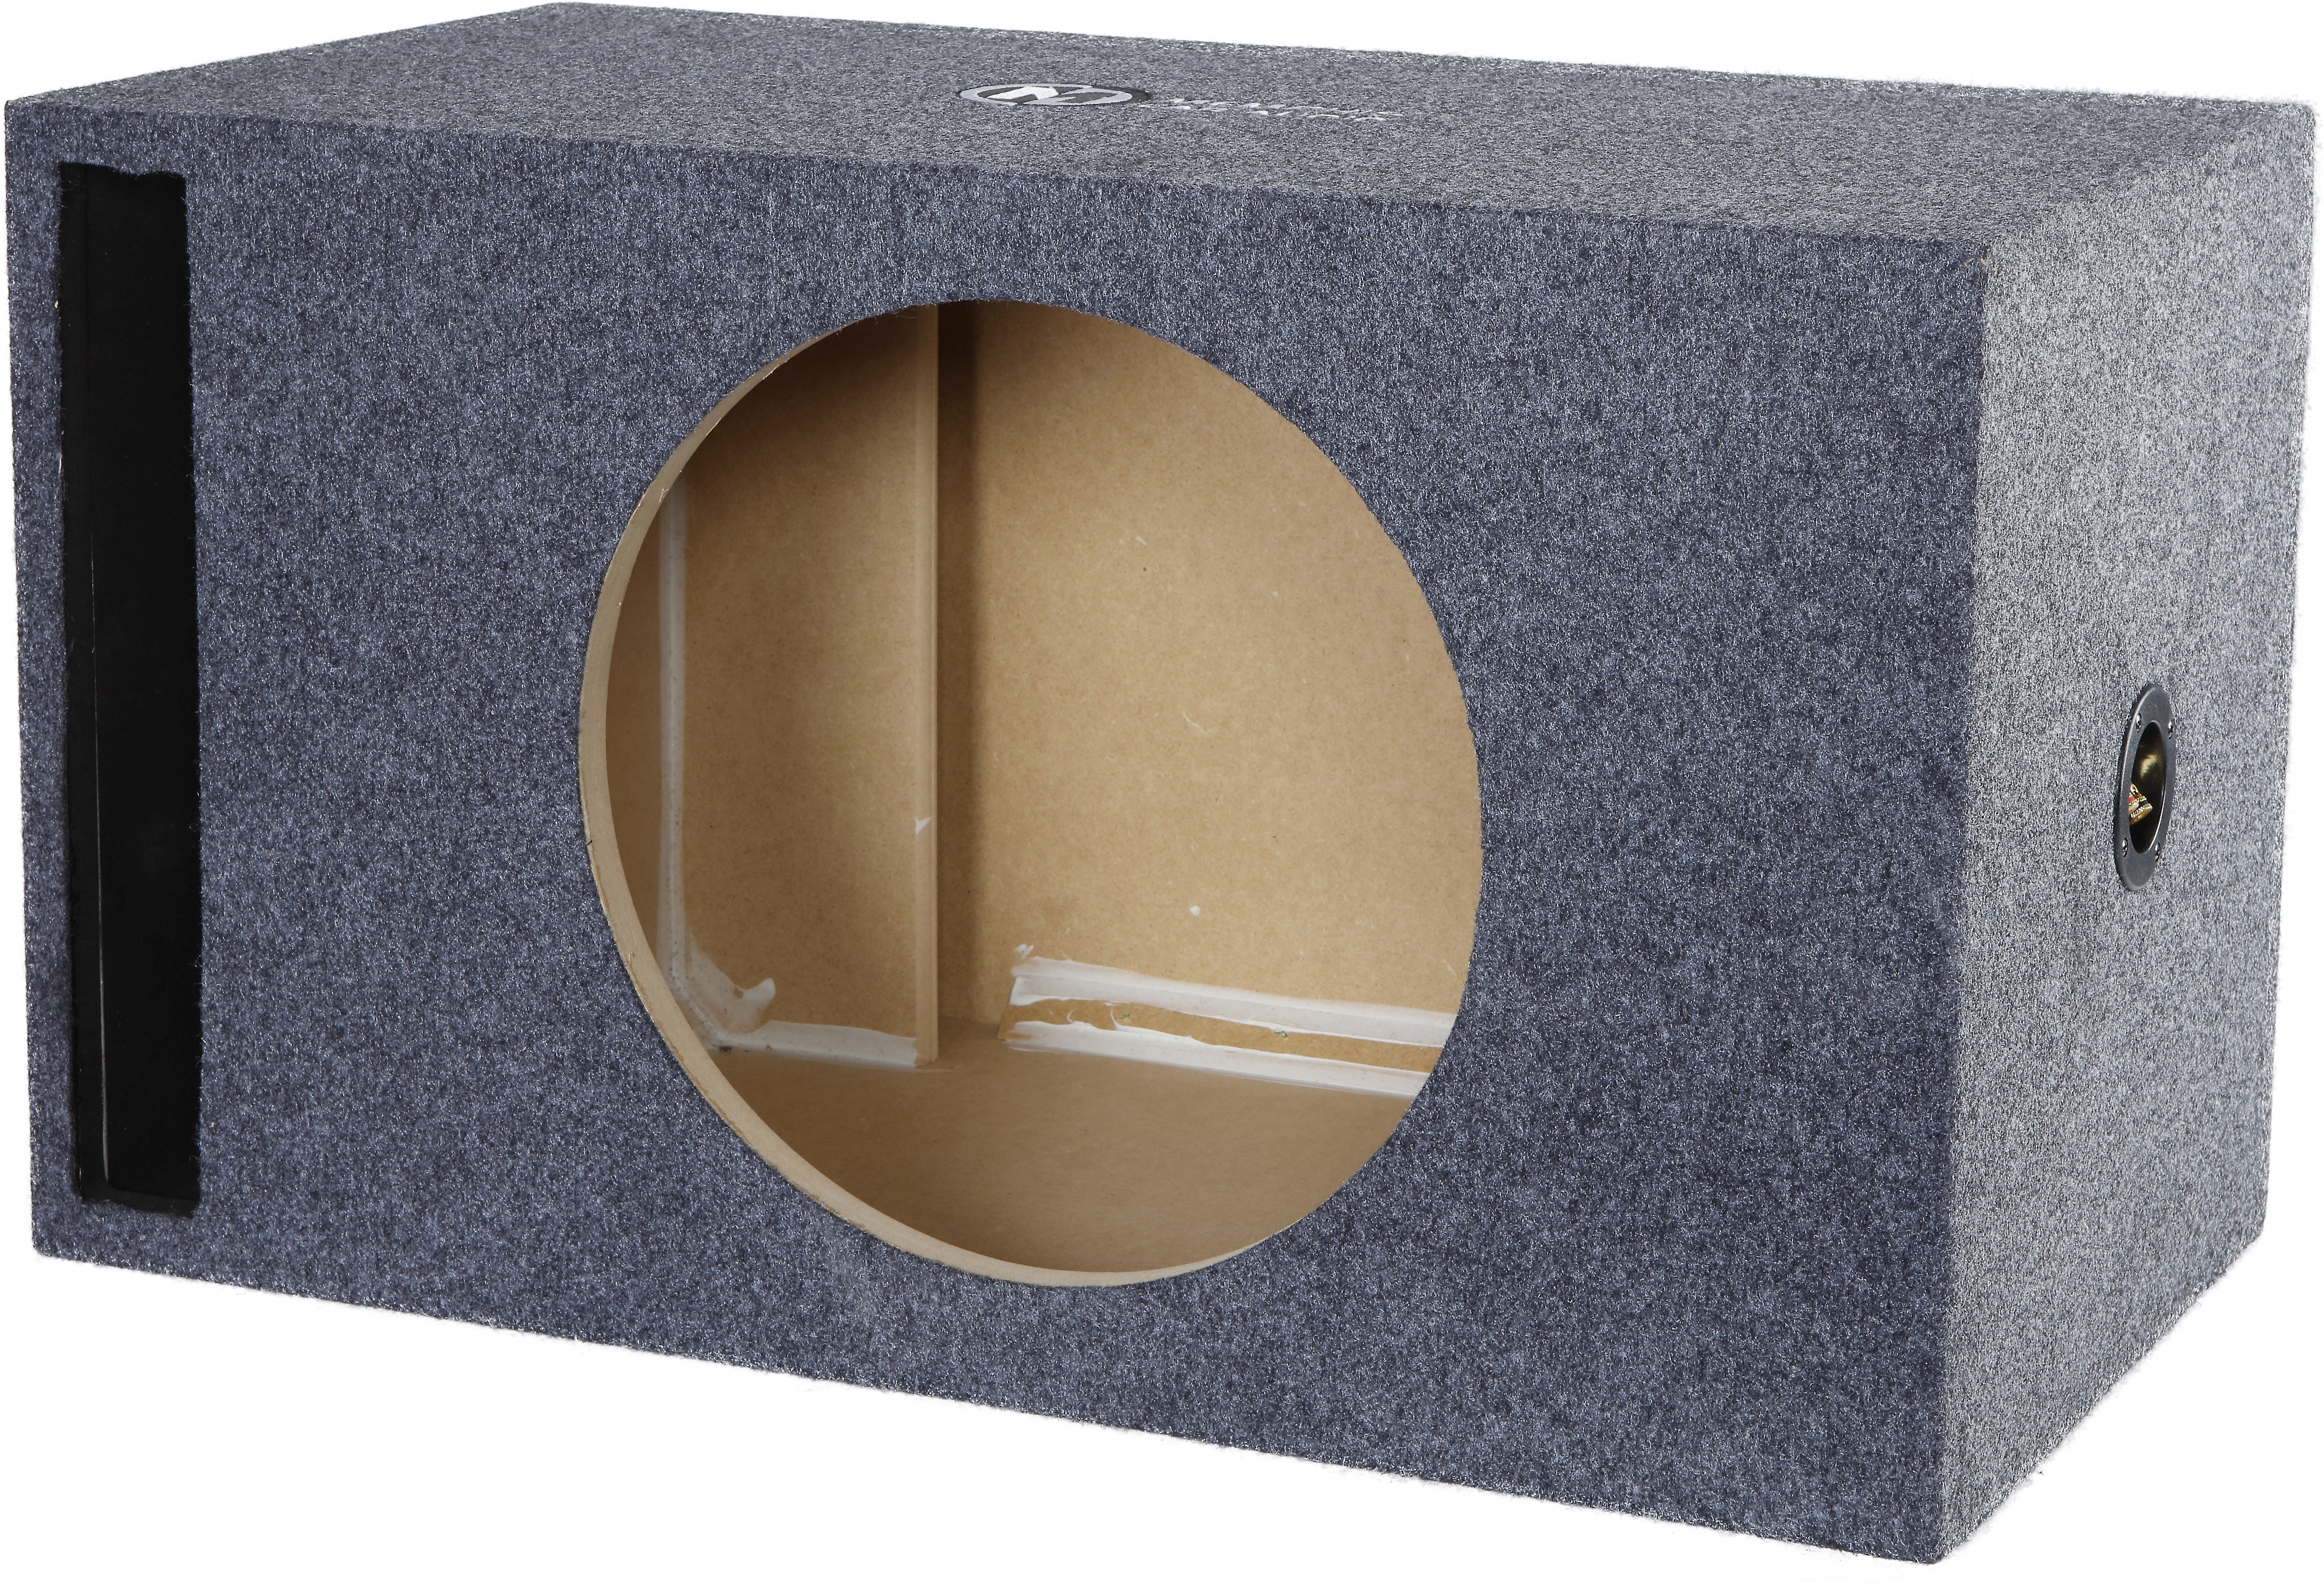 single 15 inch ported subwoofer box